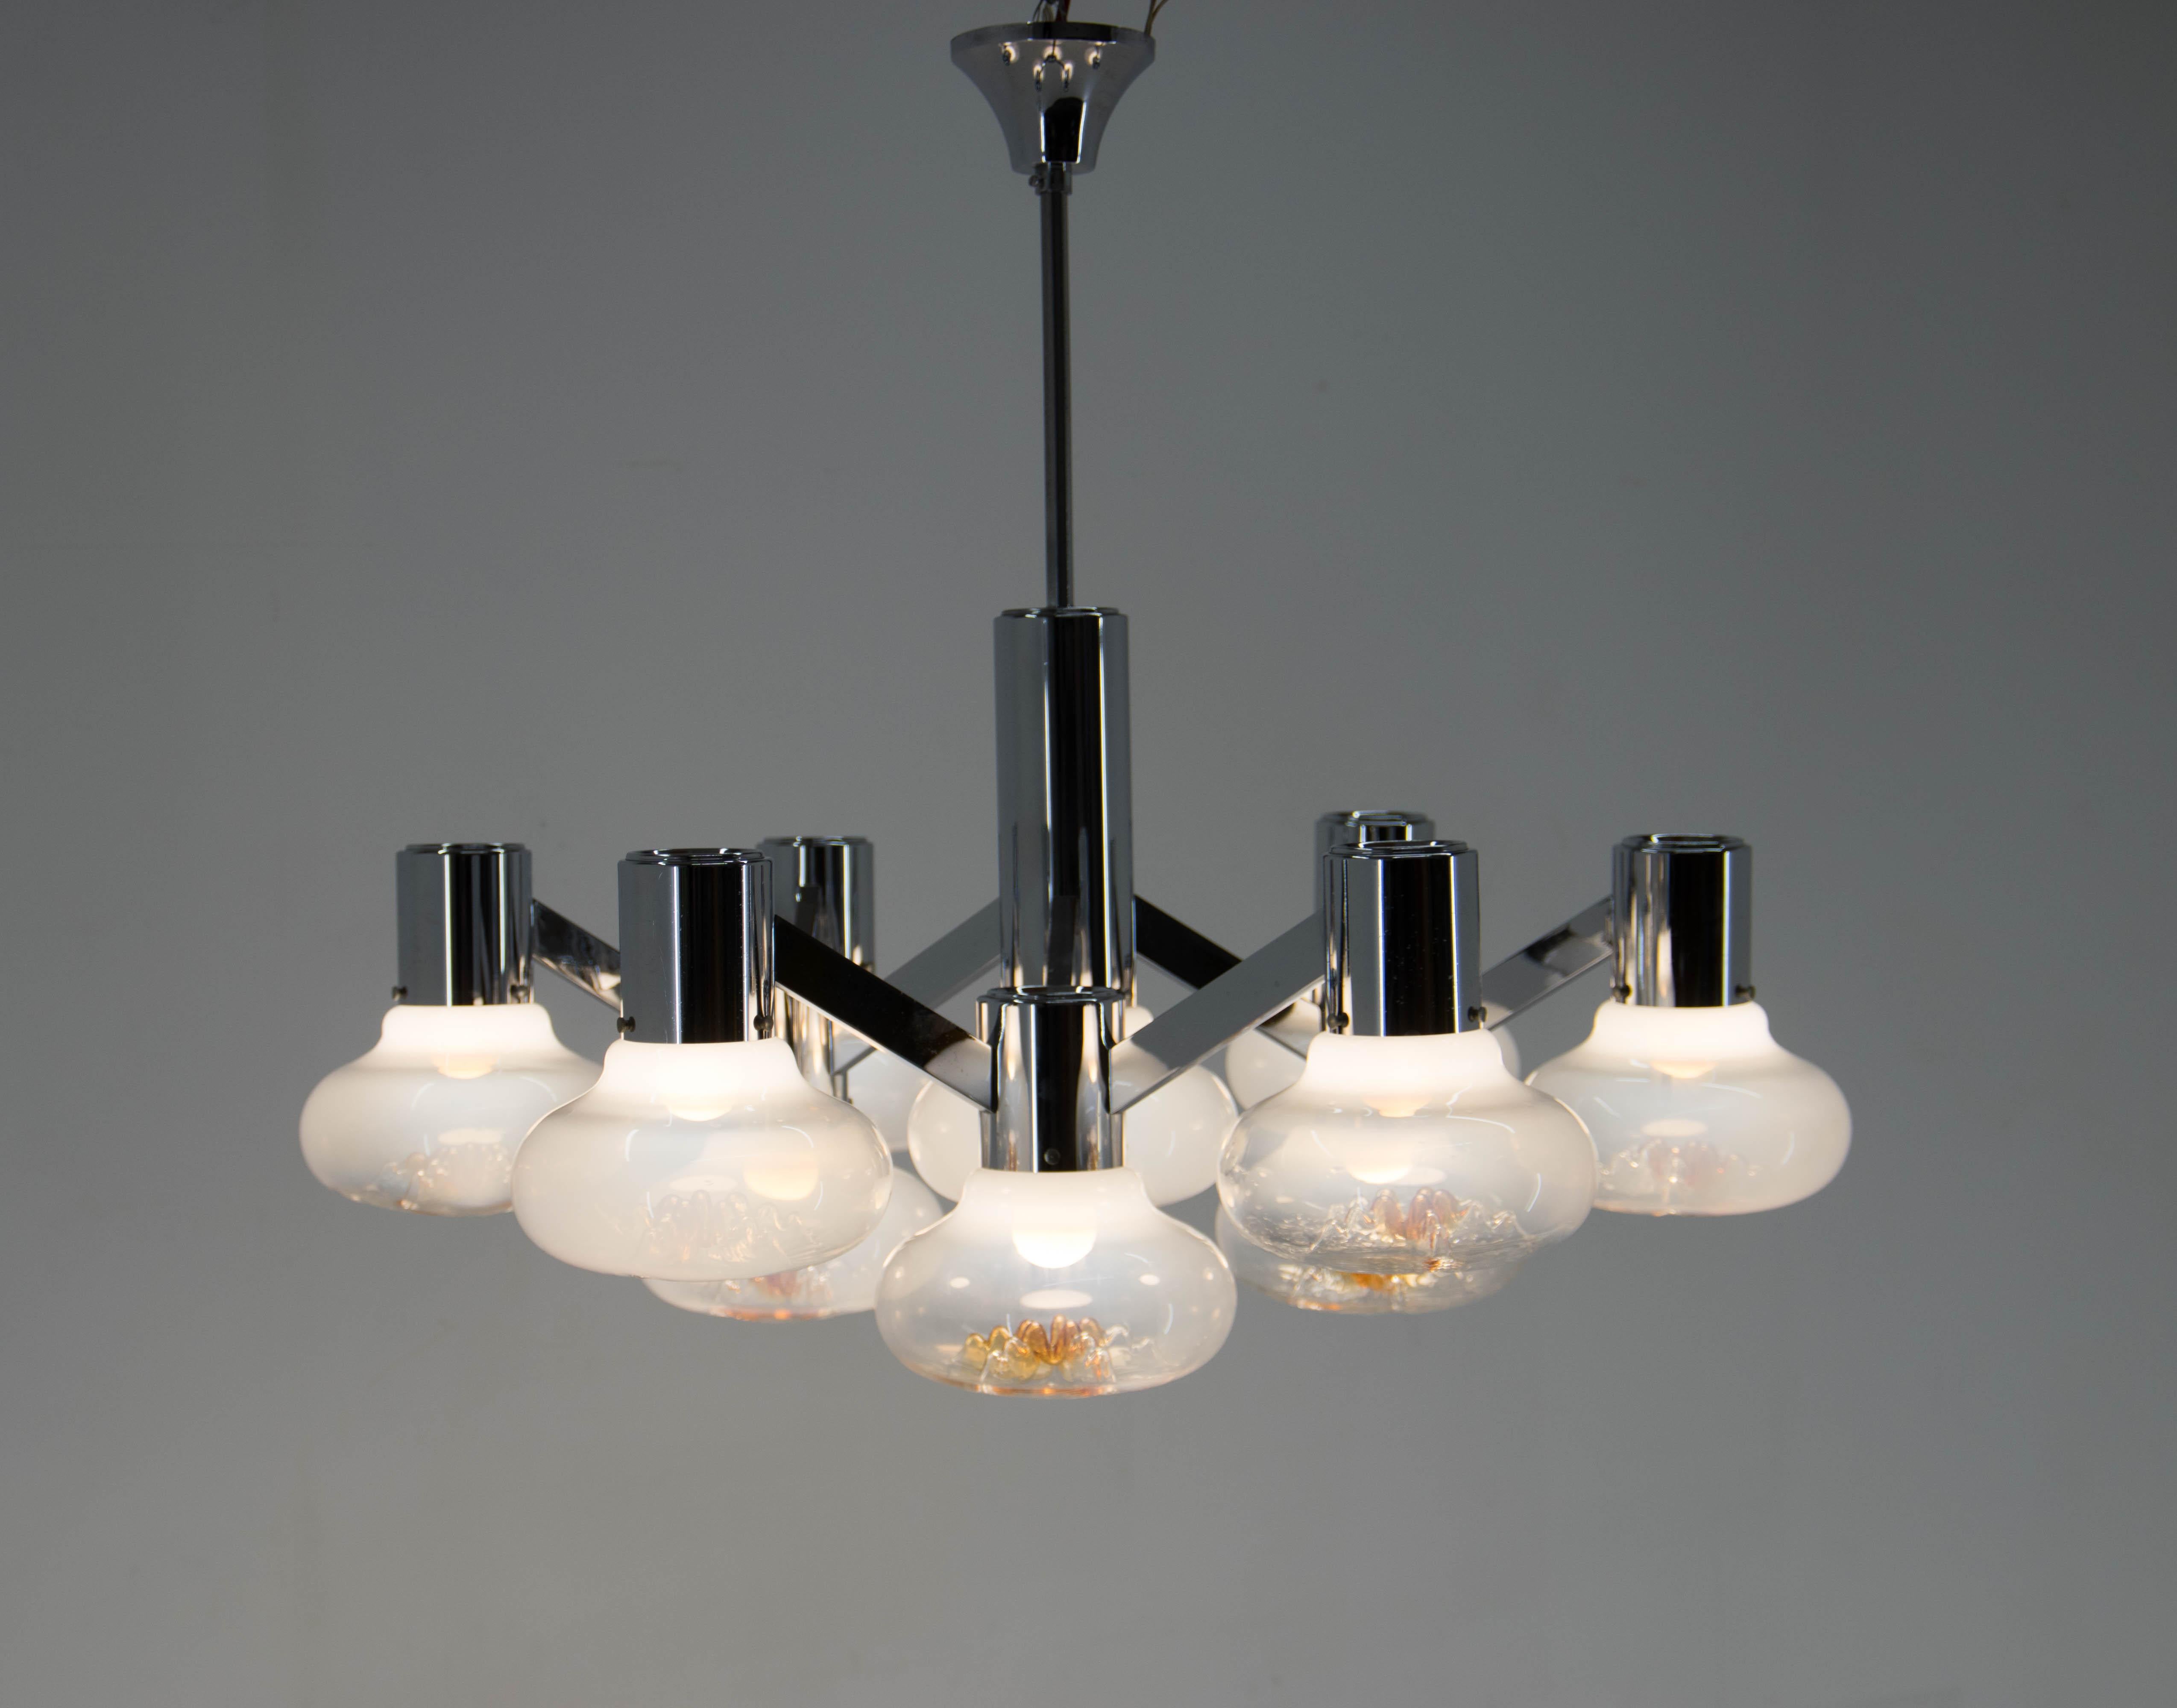 Large Italian chandelier with Murano glass shades.
Chrome with little age patina
Two separate circuits:
1+9x40W, E25-E27 bulb
US wiring compatible